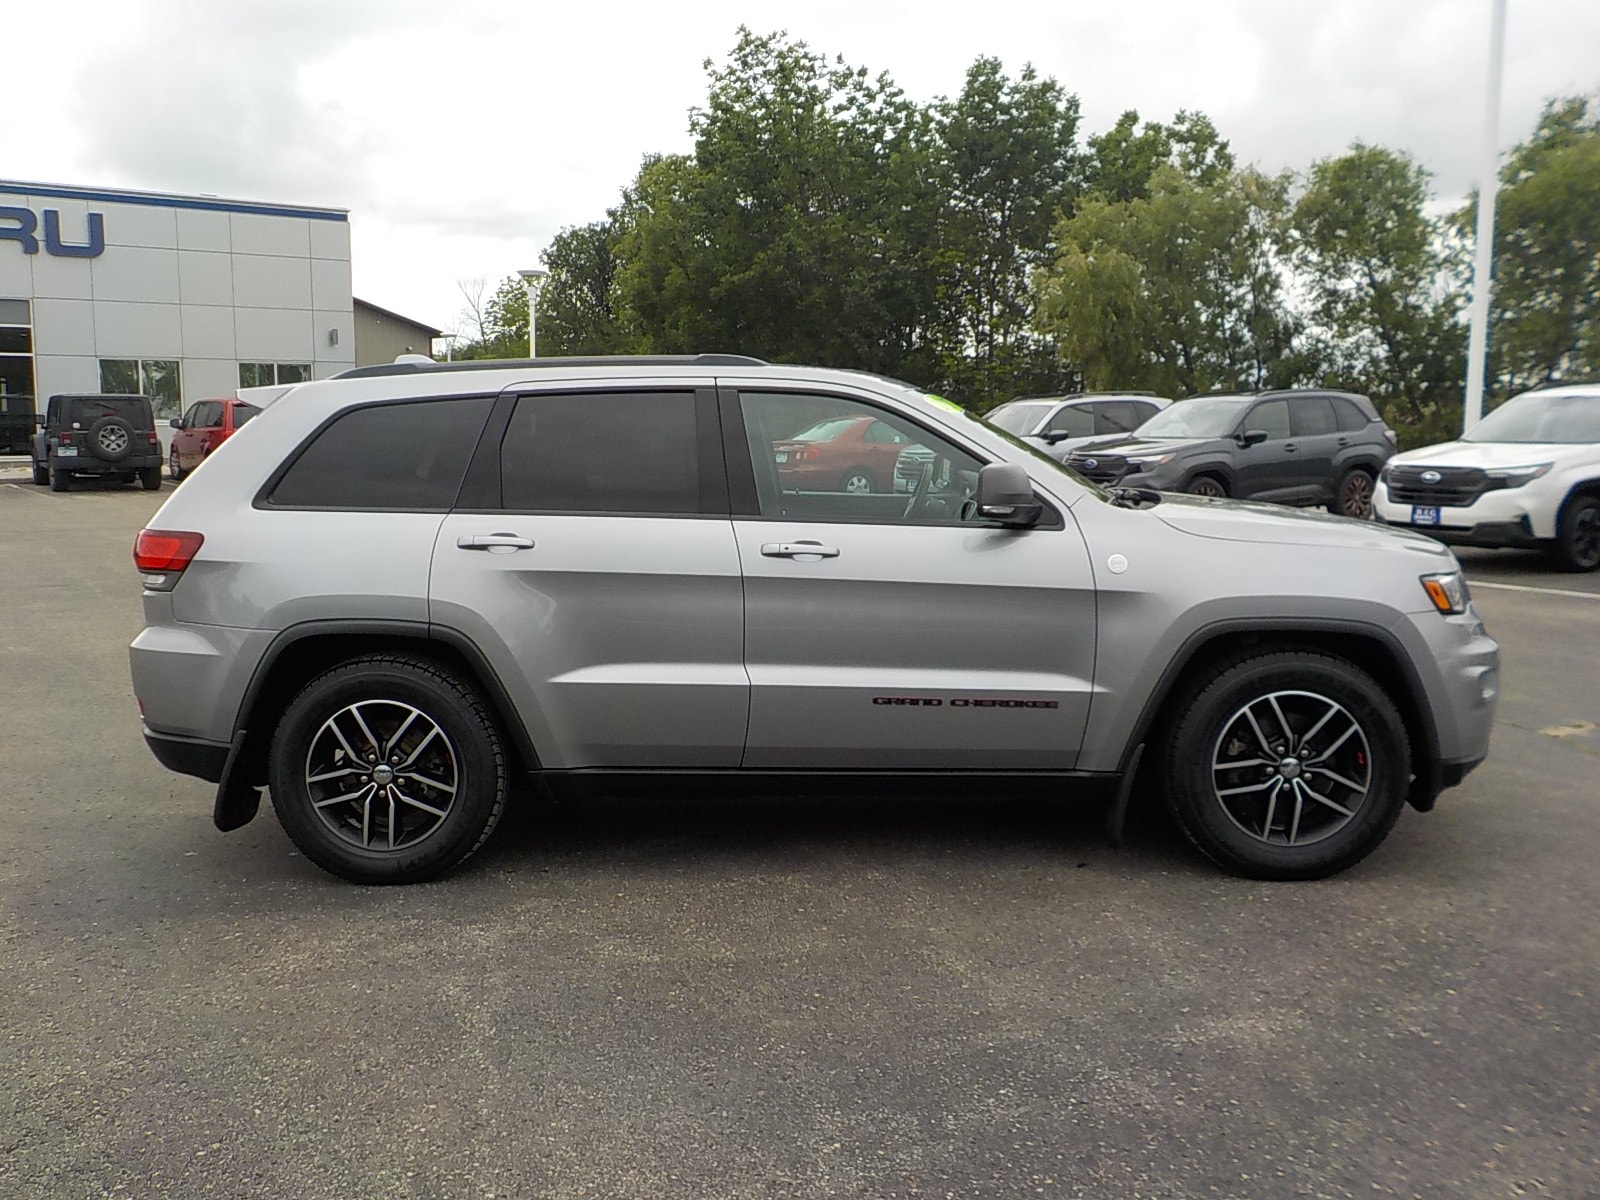 Used 2017 Jeep Grand Cherokee Trailhawk with VIN 1C4RJFLG4HC688580 for sale in Detroit Lakes, Minnesota